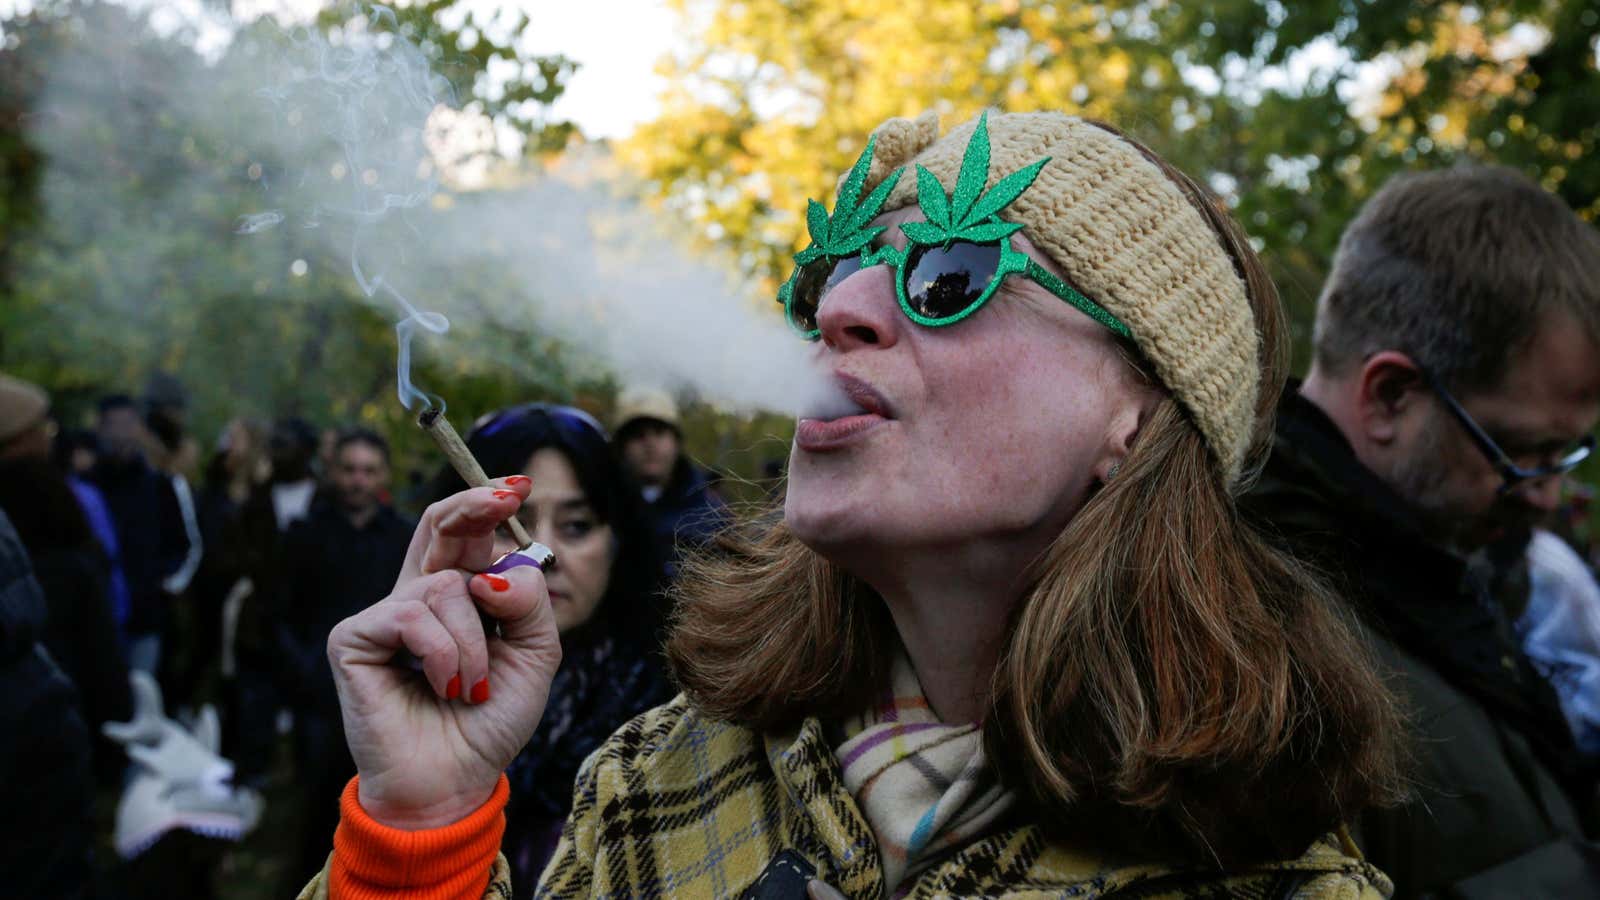 A woman smokes a joint on the day Canada legalizes recreational marijuana at Trinity Bellwoods Park, in Toronto, Ontario, Canada, October 17, 2018. REUTERS/Carlos Osorio…